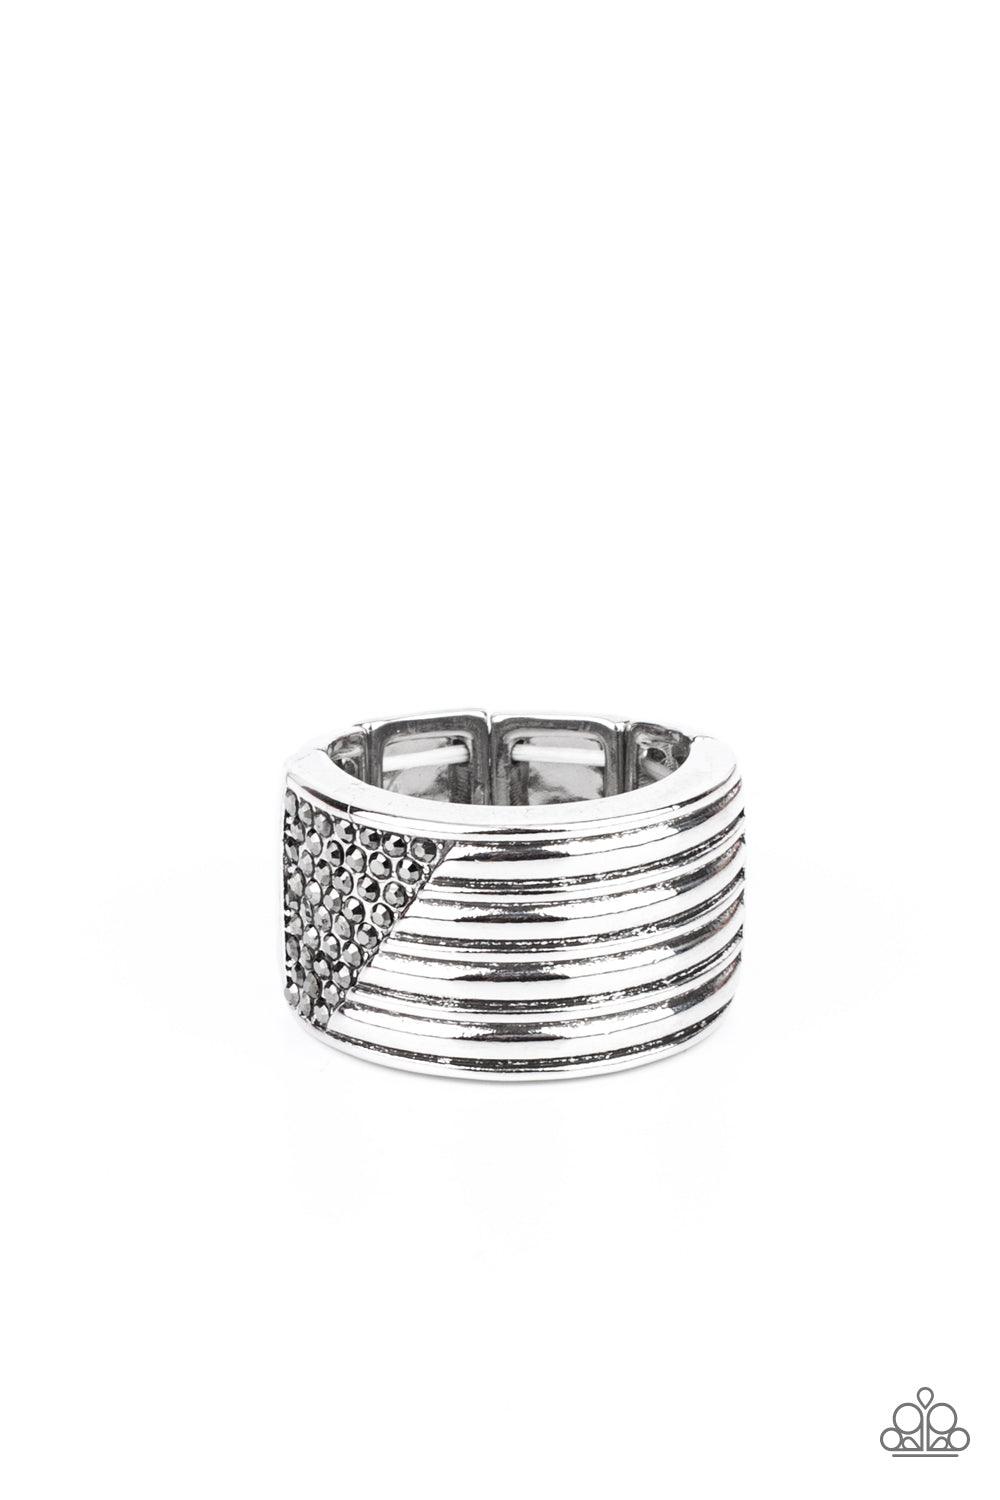 Paparazzi Accessories Legendary Lineup - Silver Engraved in linear patterns, the corner of a thick silver band has been chiseled away and encrusted in dainty rows of hematite rhinestones for a standout finish. Features a stretchy band for a flexible fit.